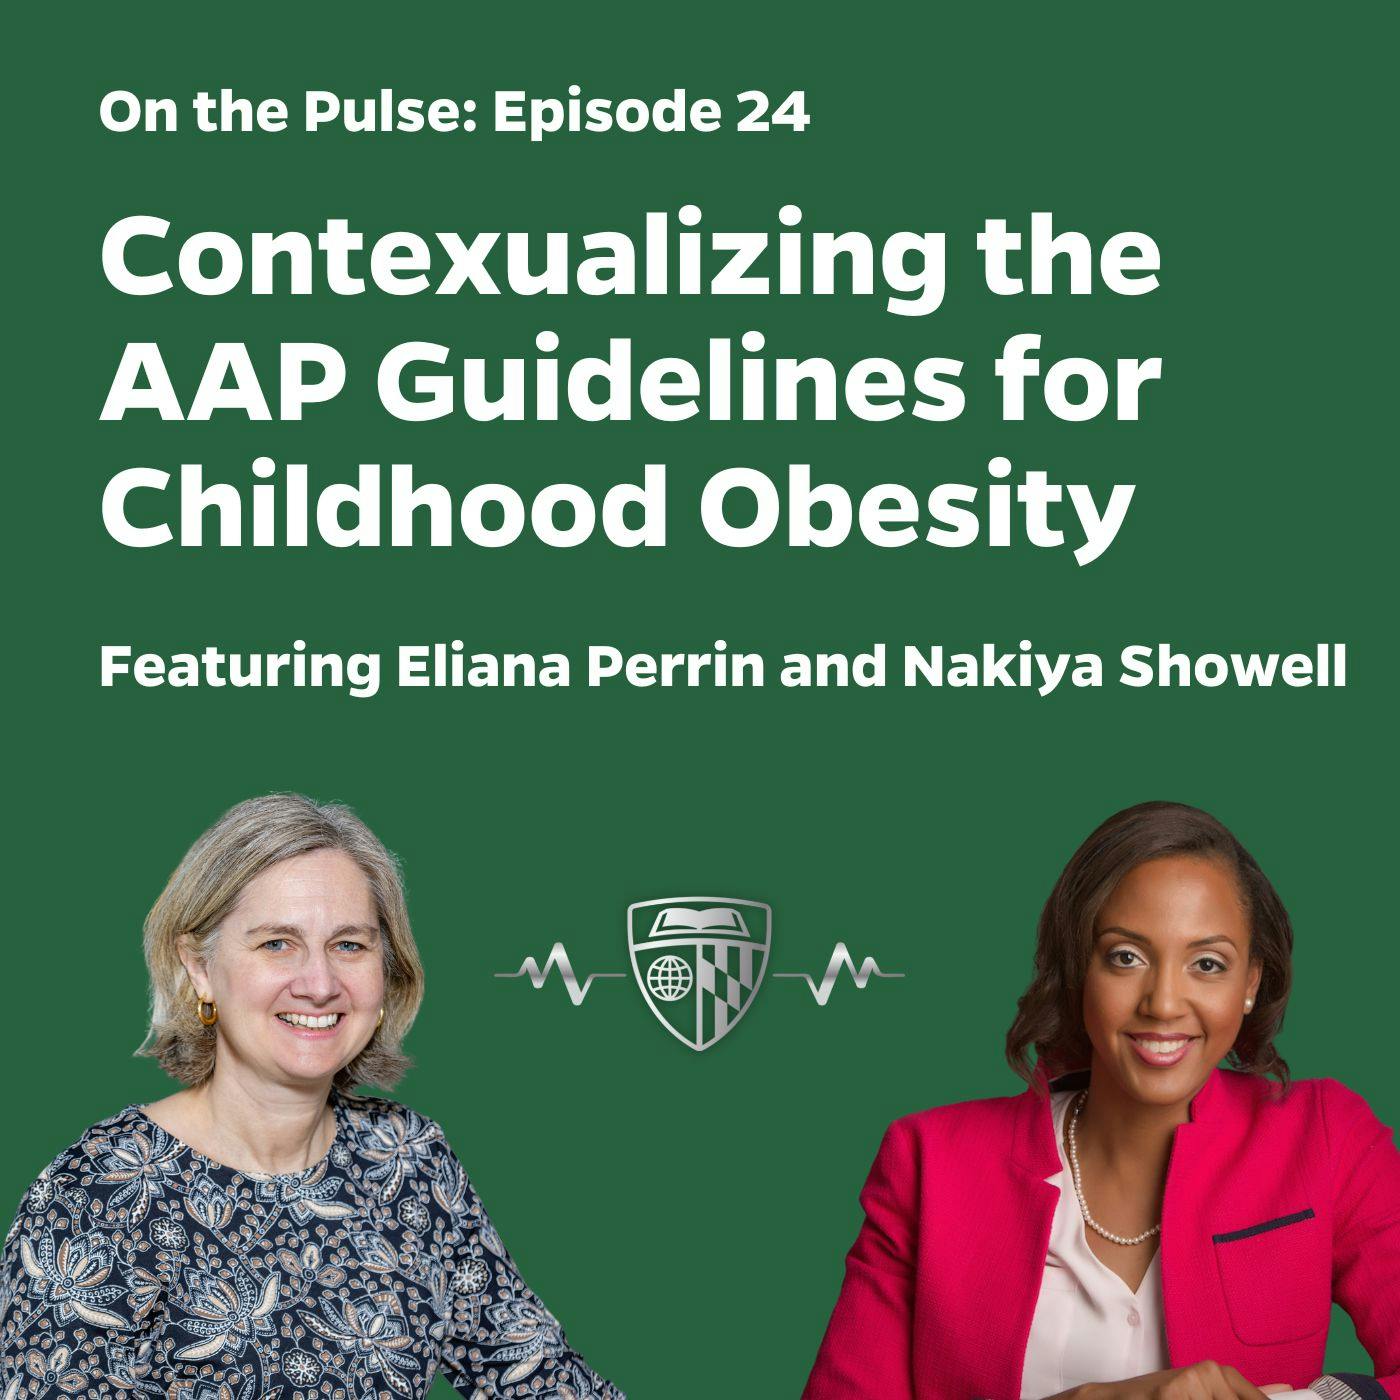 Episode 24: Contextualizing the New AAP Guidelines for Childhood Obesity